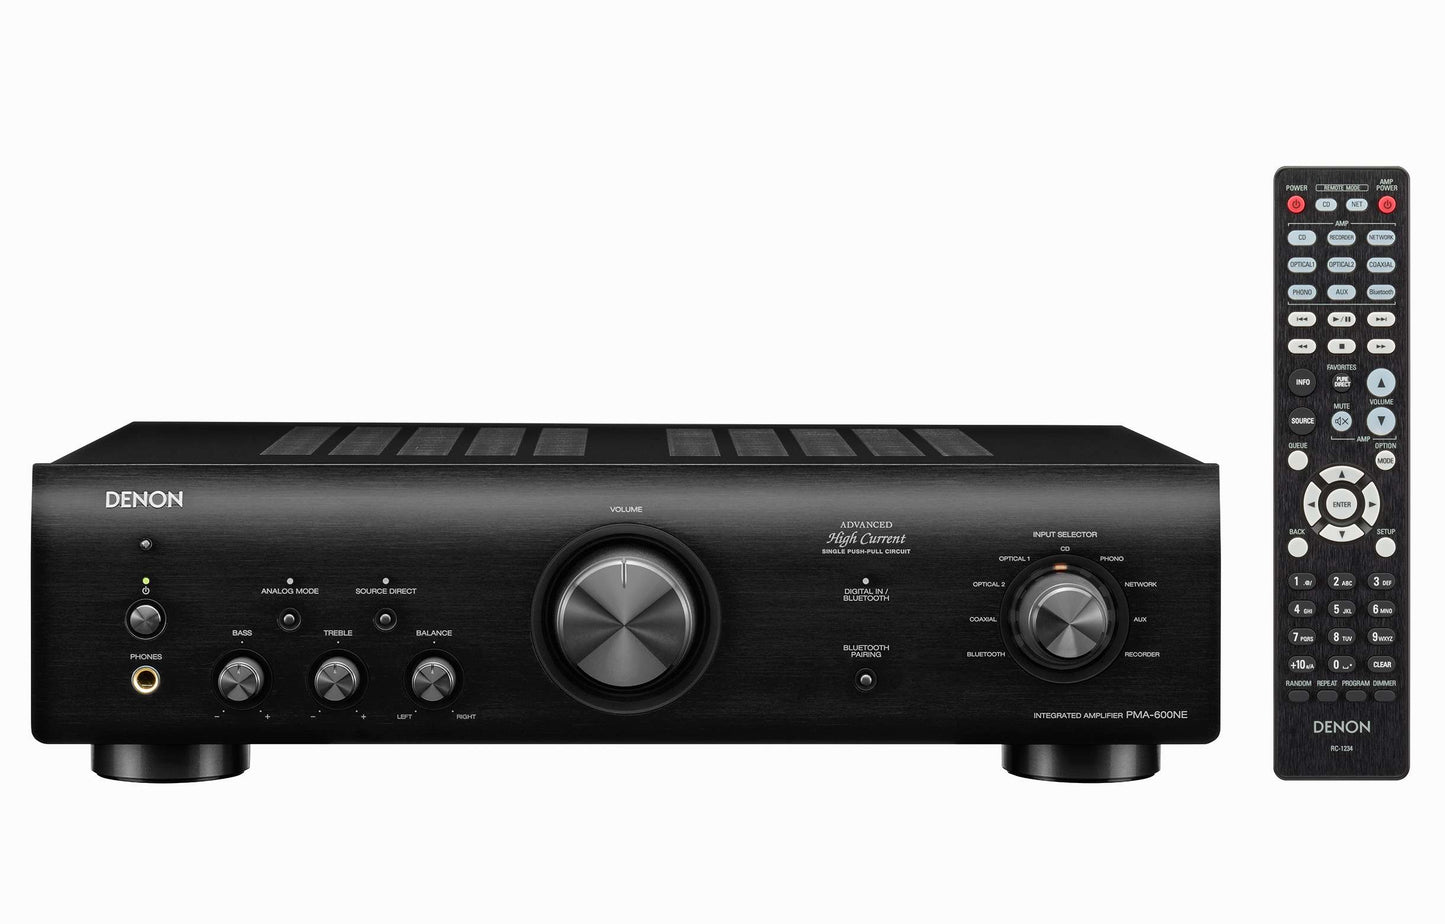 Denon PMA-600NE Integrated Amplifier with 70W Power per Channel and Bluetooth Support